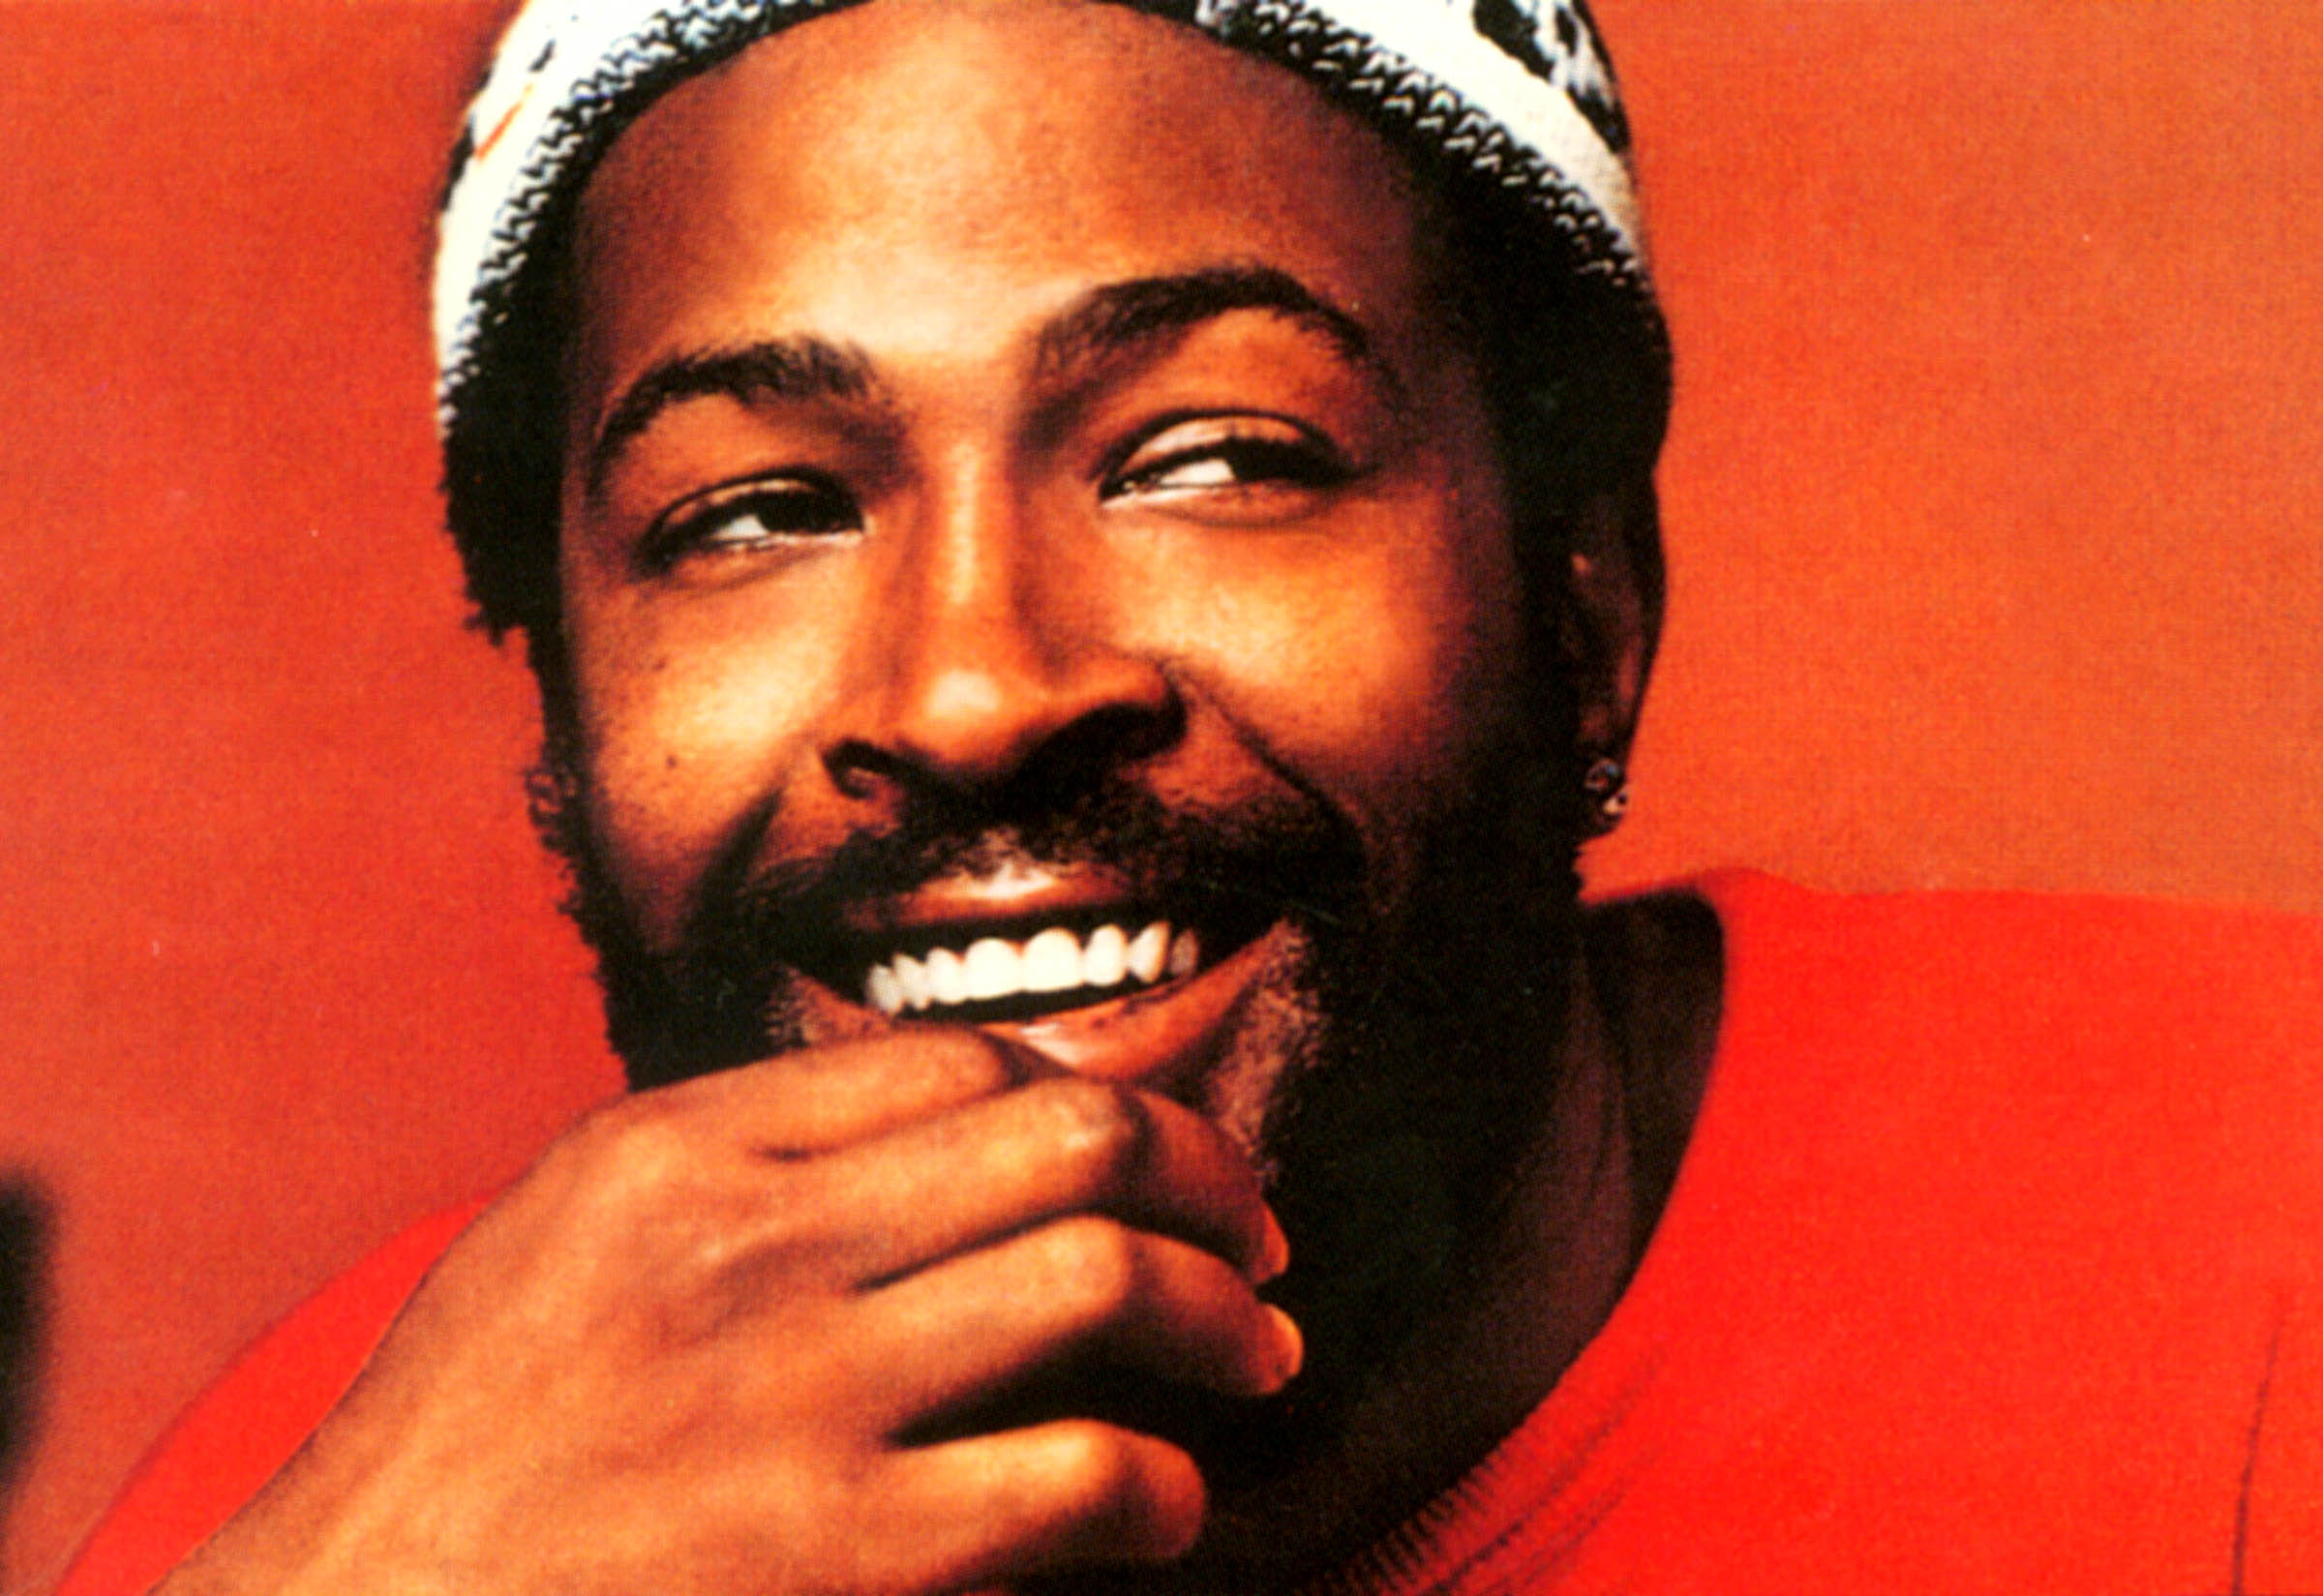 Marvin Gaye, "Got To Give It Up" - American Songwriter.